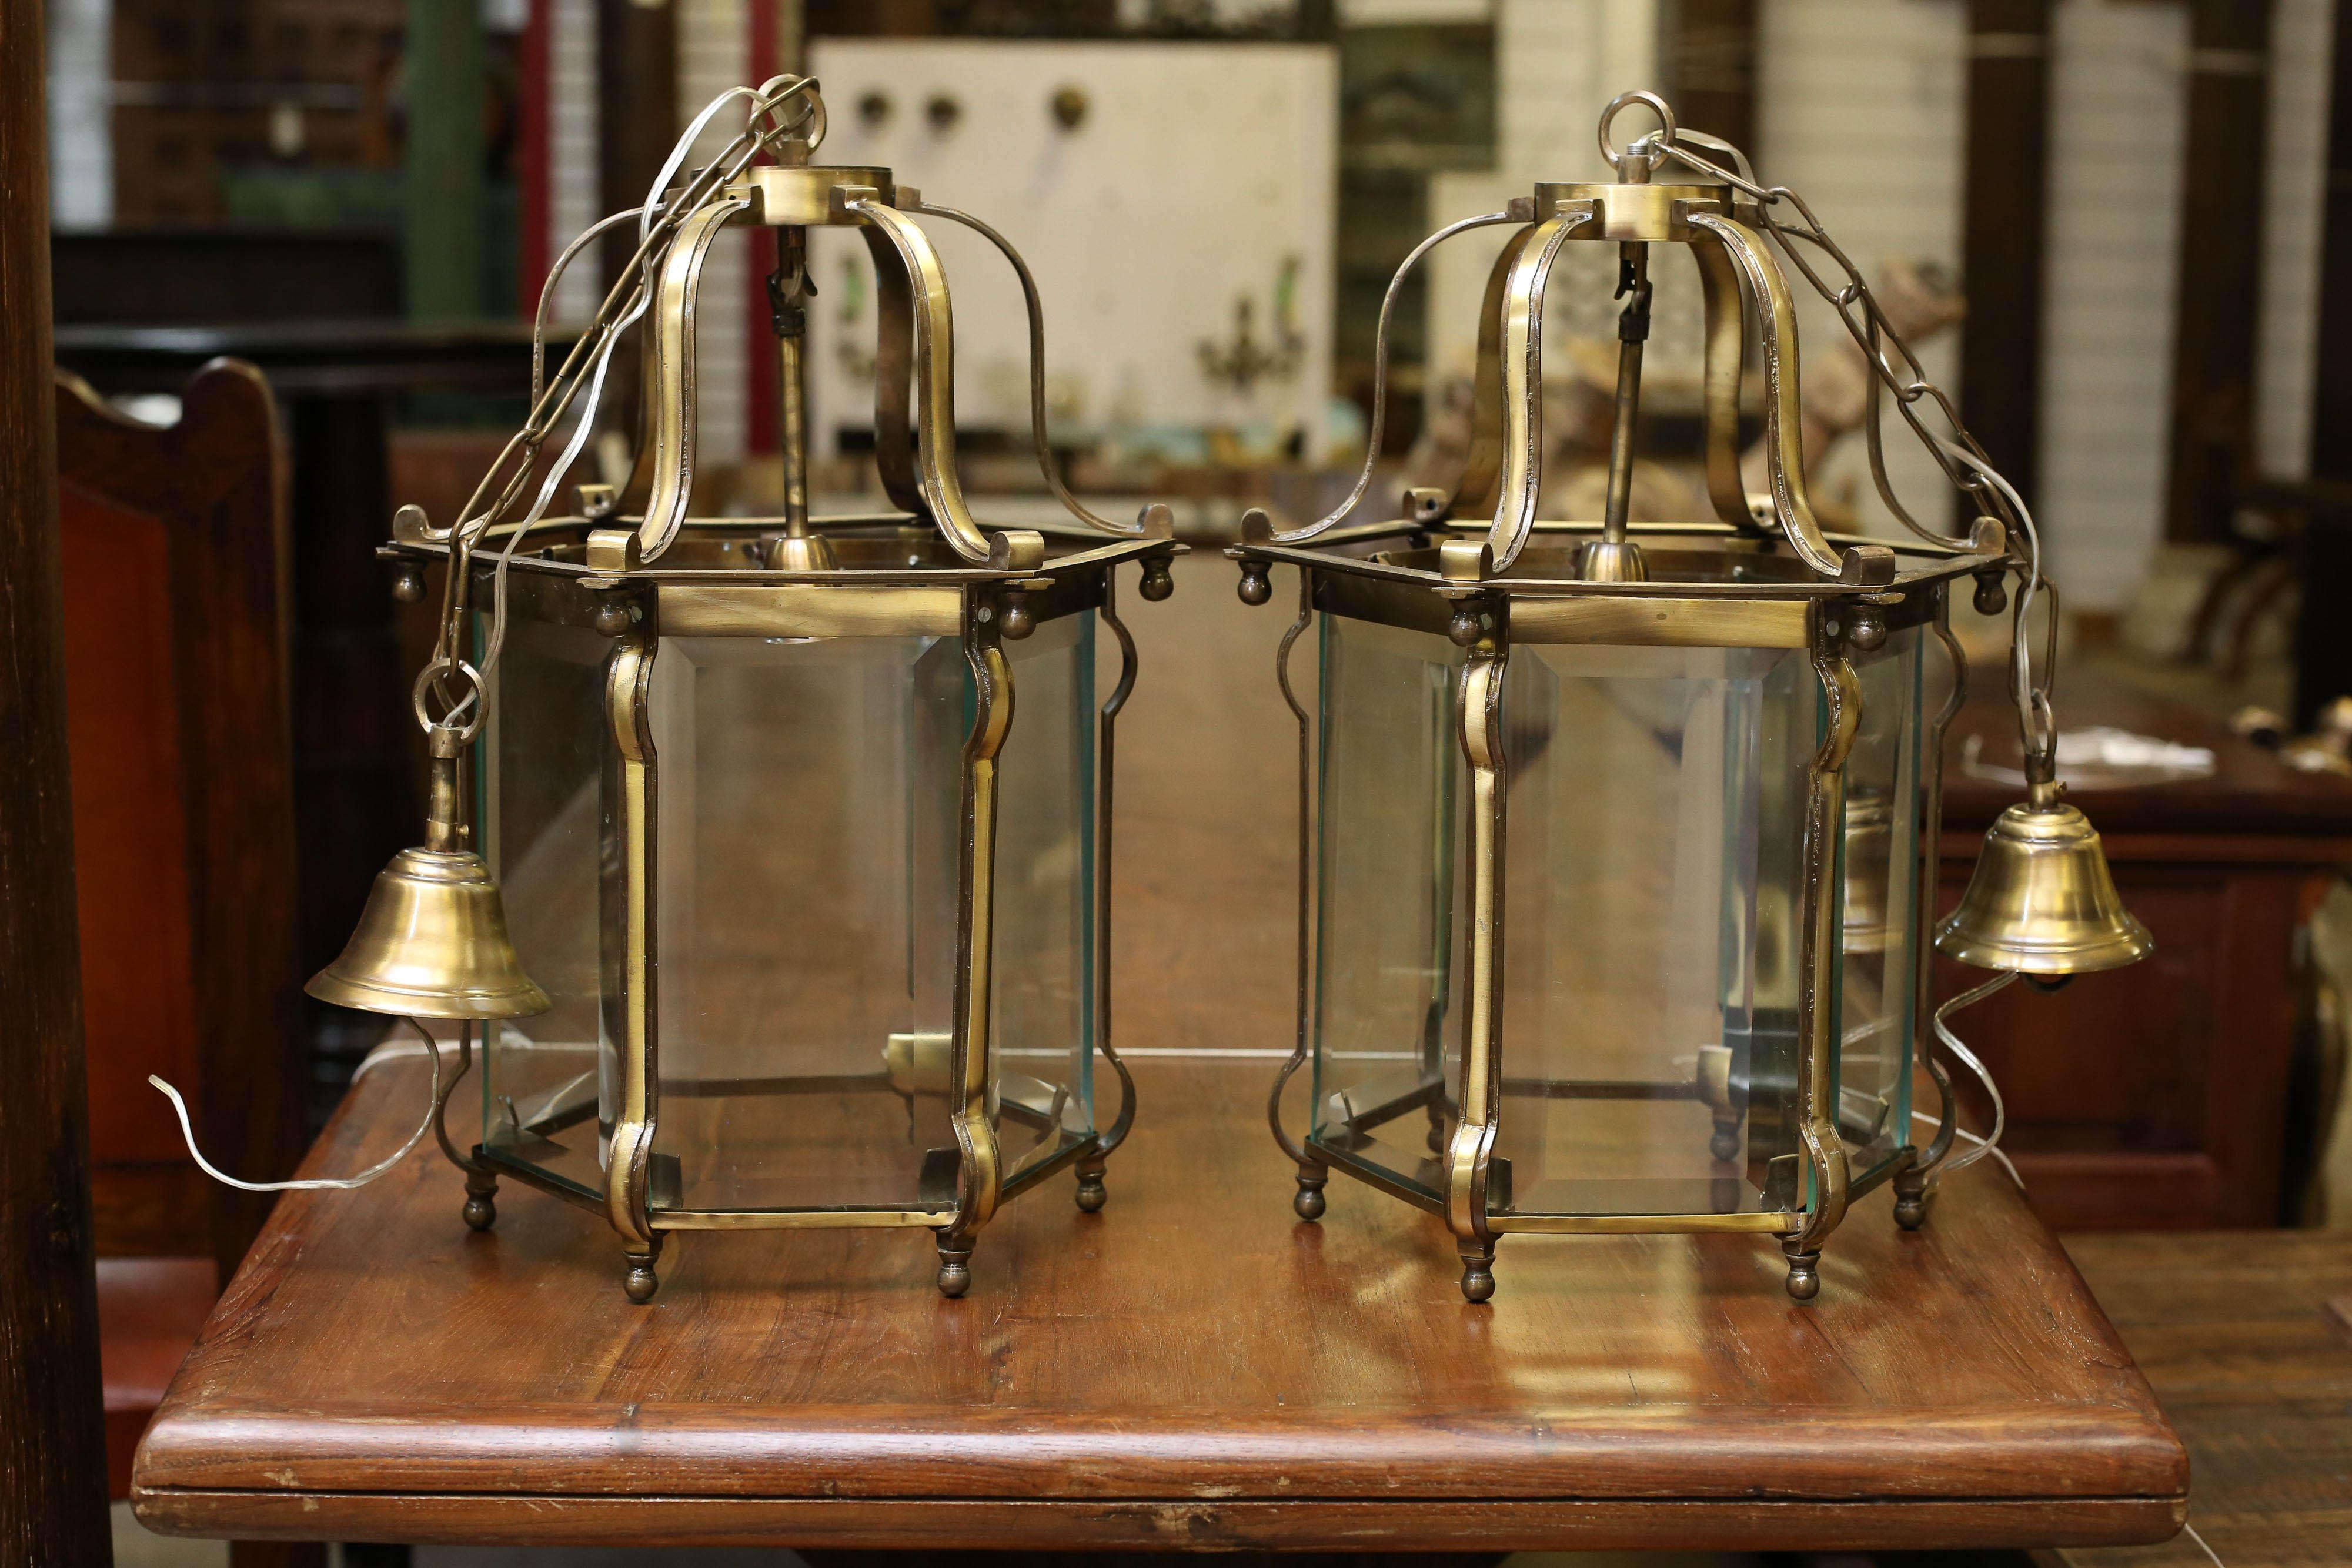 Origin not clear. Made in circa 1940s. Perhaps from an old European firm in Eastern India. These exceptionally well made lanterns are wired to USA standard. The striking features of these lanterns are hand made perfection and the fine quality of